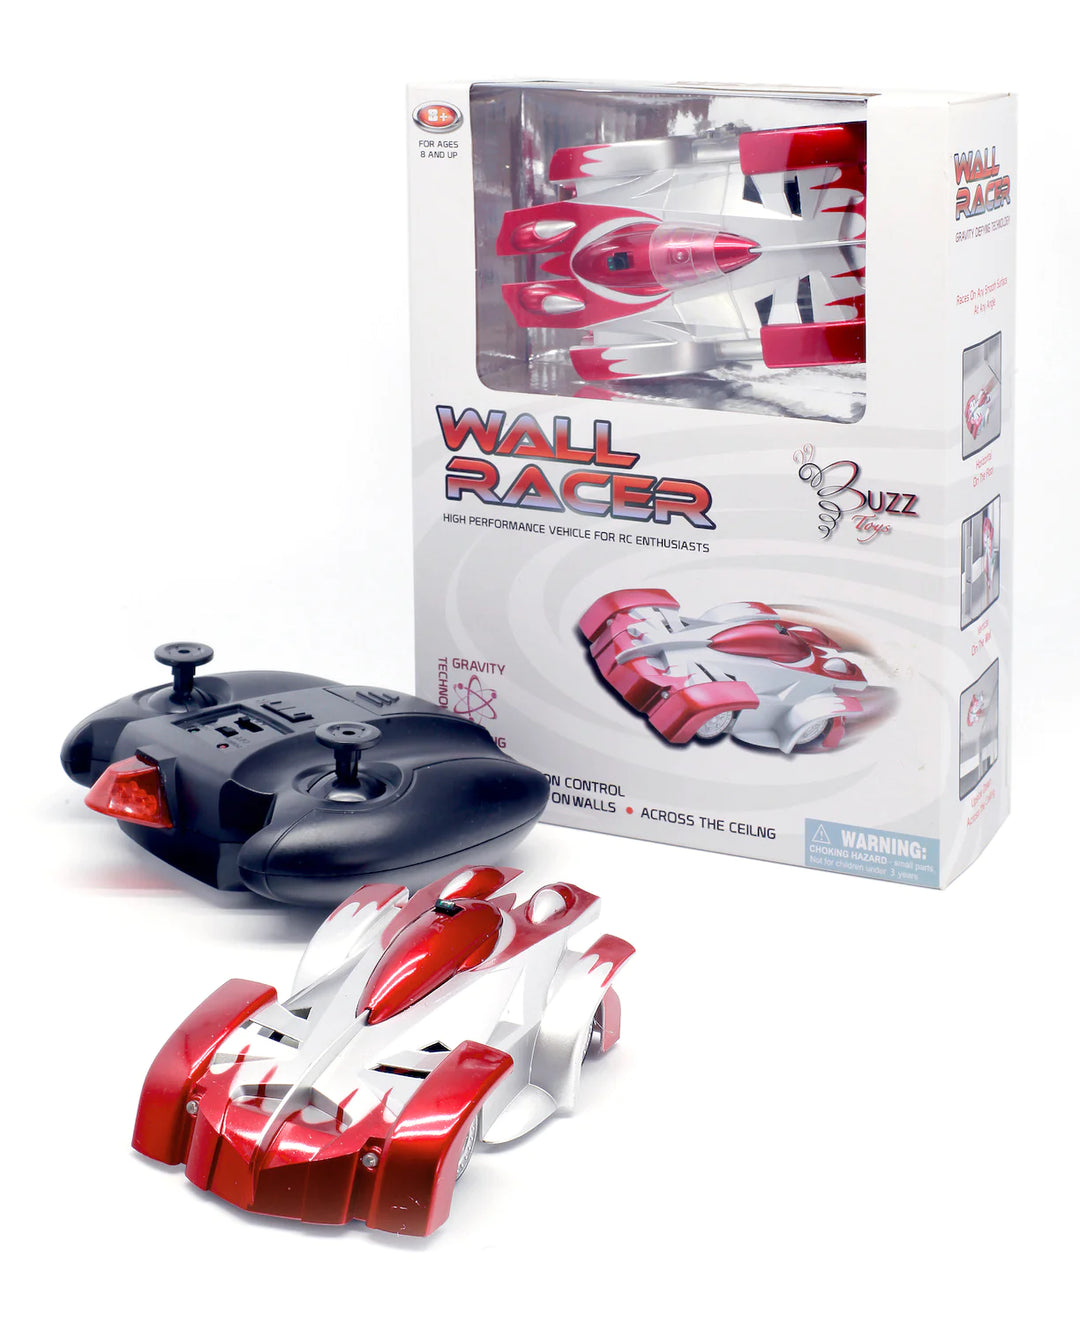 Wall RacerX Remote Control Car by Buzz Retail Packaging with car in red.